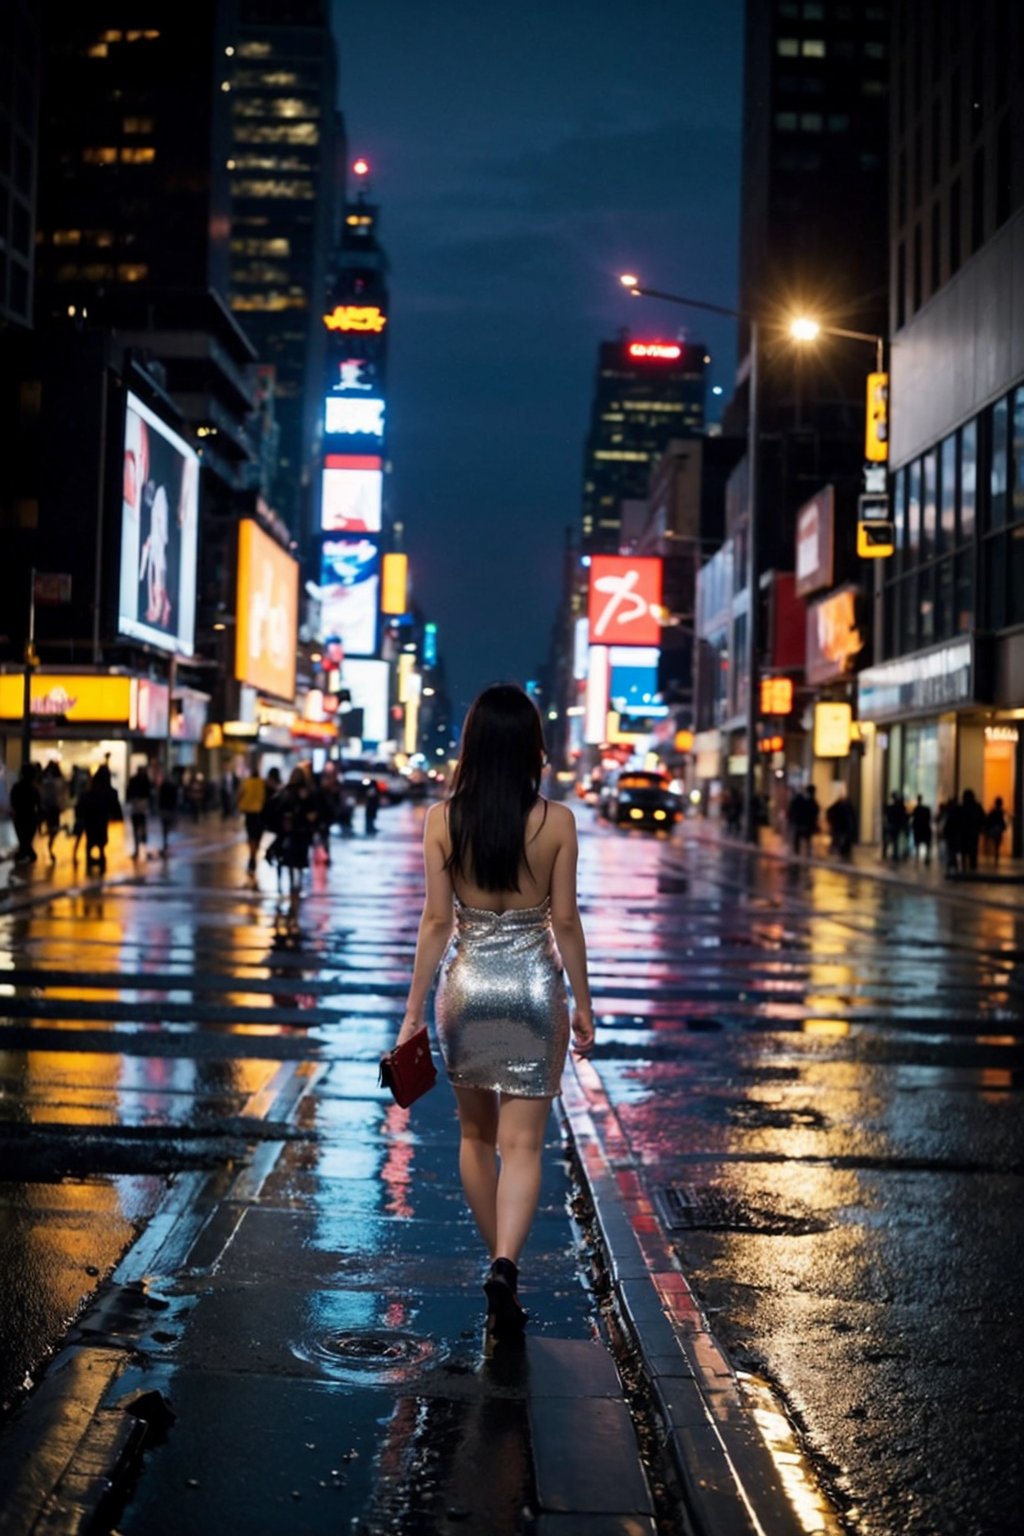 Best Quality, Masterpiece, Ultra High Resolution, (Realisticity:1.4), Original Photo, Cinematic Lighting, night shot, 1girl, full body, (sparkly:1.3) sequins dress, pencil skirt, thigh, red bow, street, after rain, wet, (deserted street:1.4), crossroads, zebra crossing, times square, new york, raytraced reflection, dynamic Angle, (bokeh:1.2), depth of field, incredible sky, looking up to the sky, (aesthetics and atmosphere:1.2),
